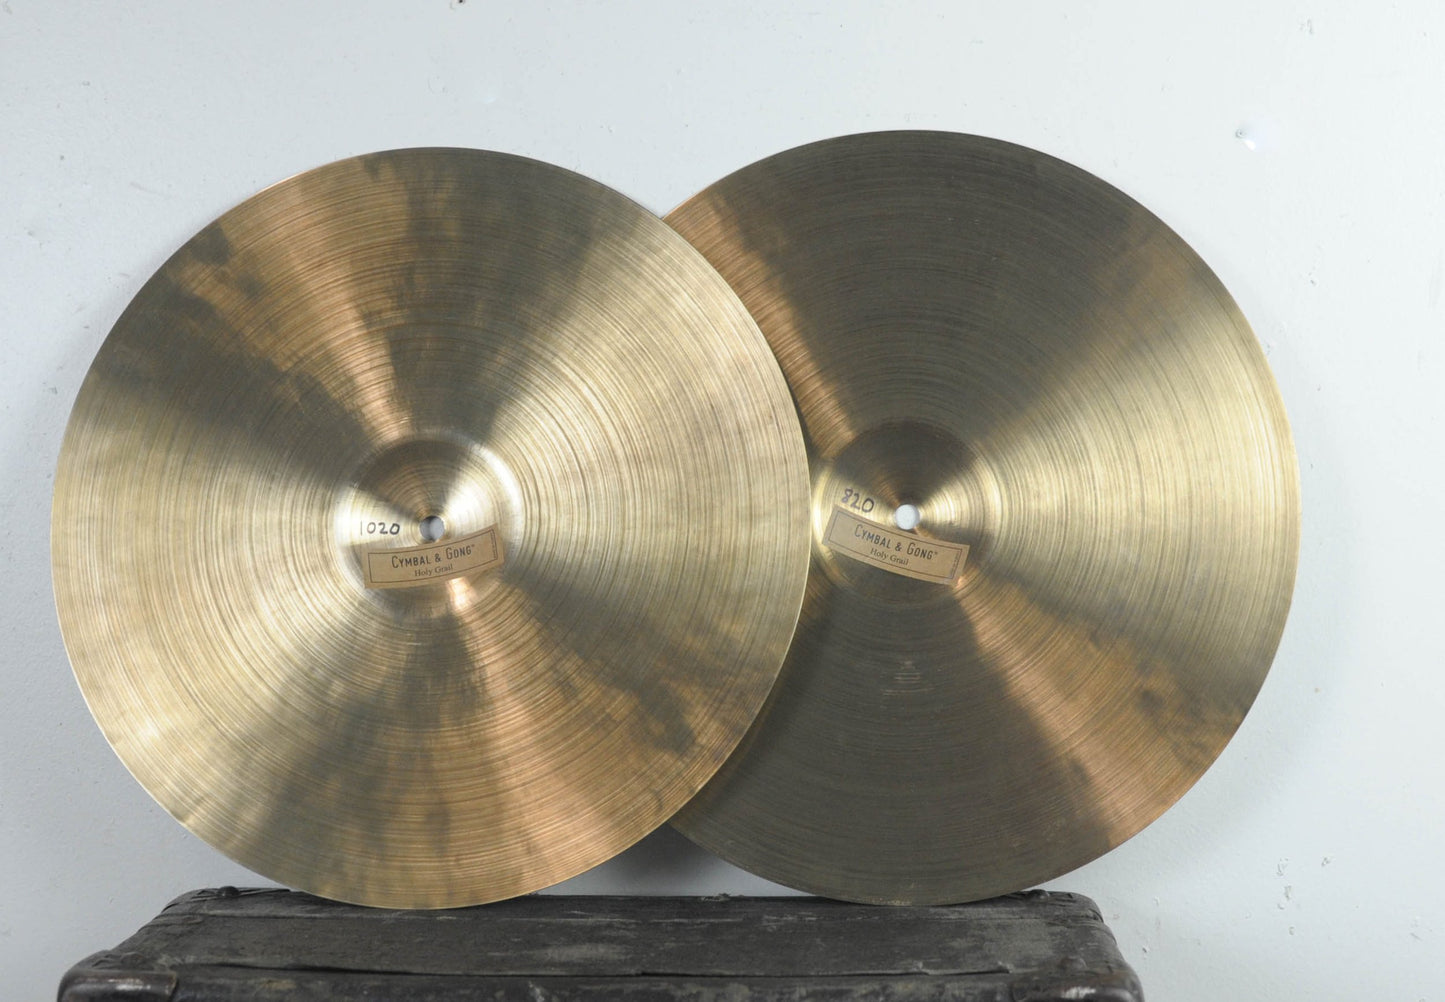 Cymbal and Gong 15" Holy Grail Ride Hi Hat Cymbals 820g 1020g